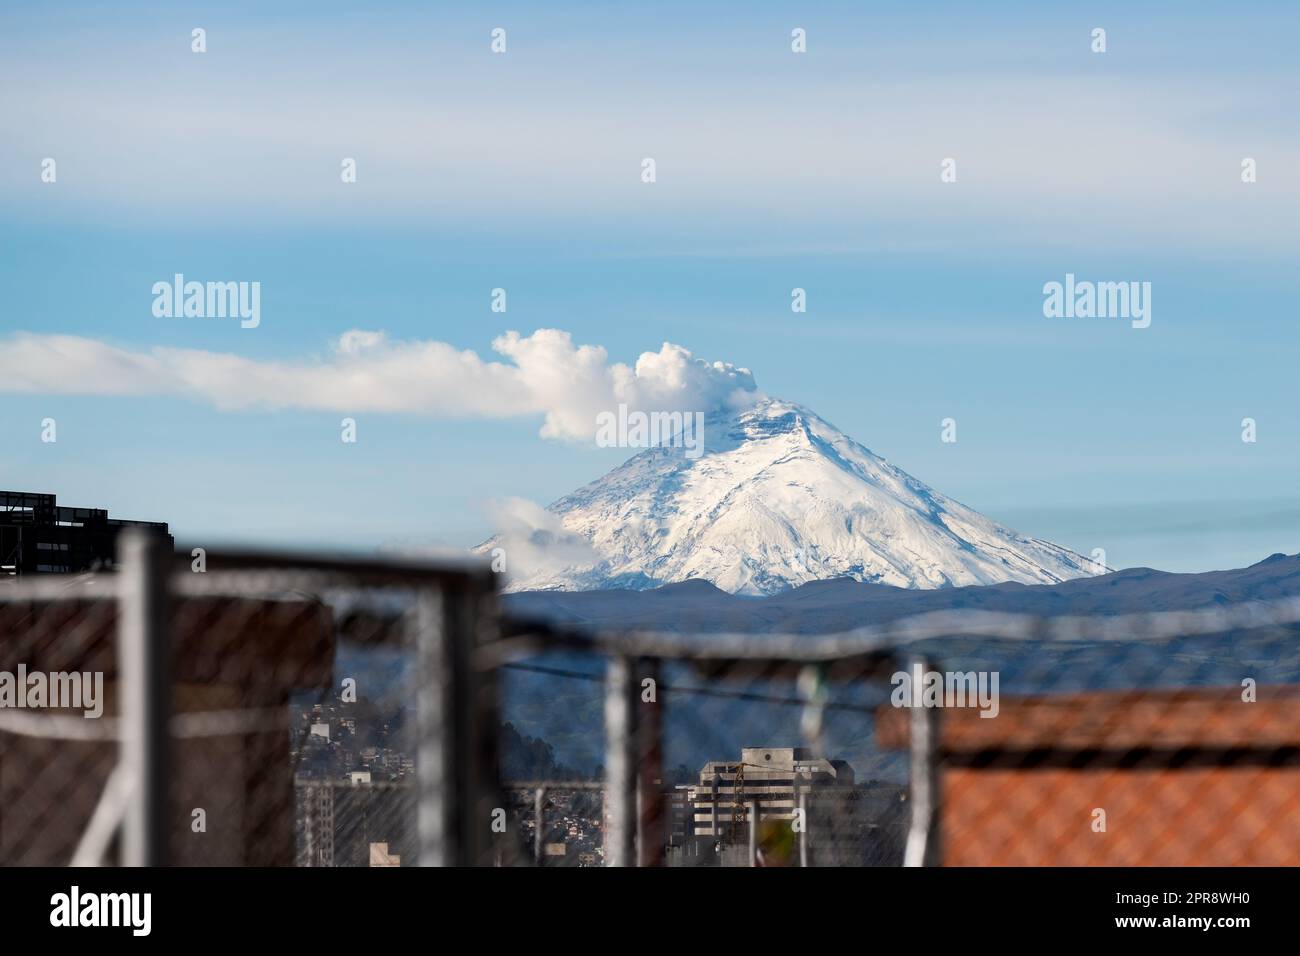 Eruption of Cotopaxi Volcano with ash and steam cloud seen from Quito, Ecuador. Stock Photo